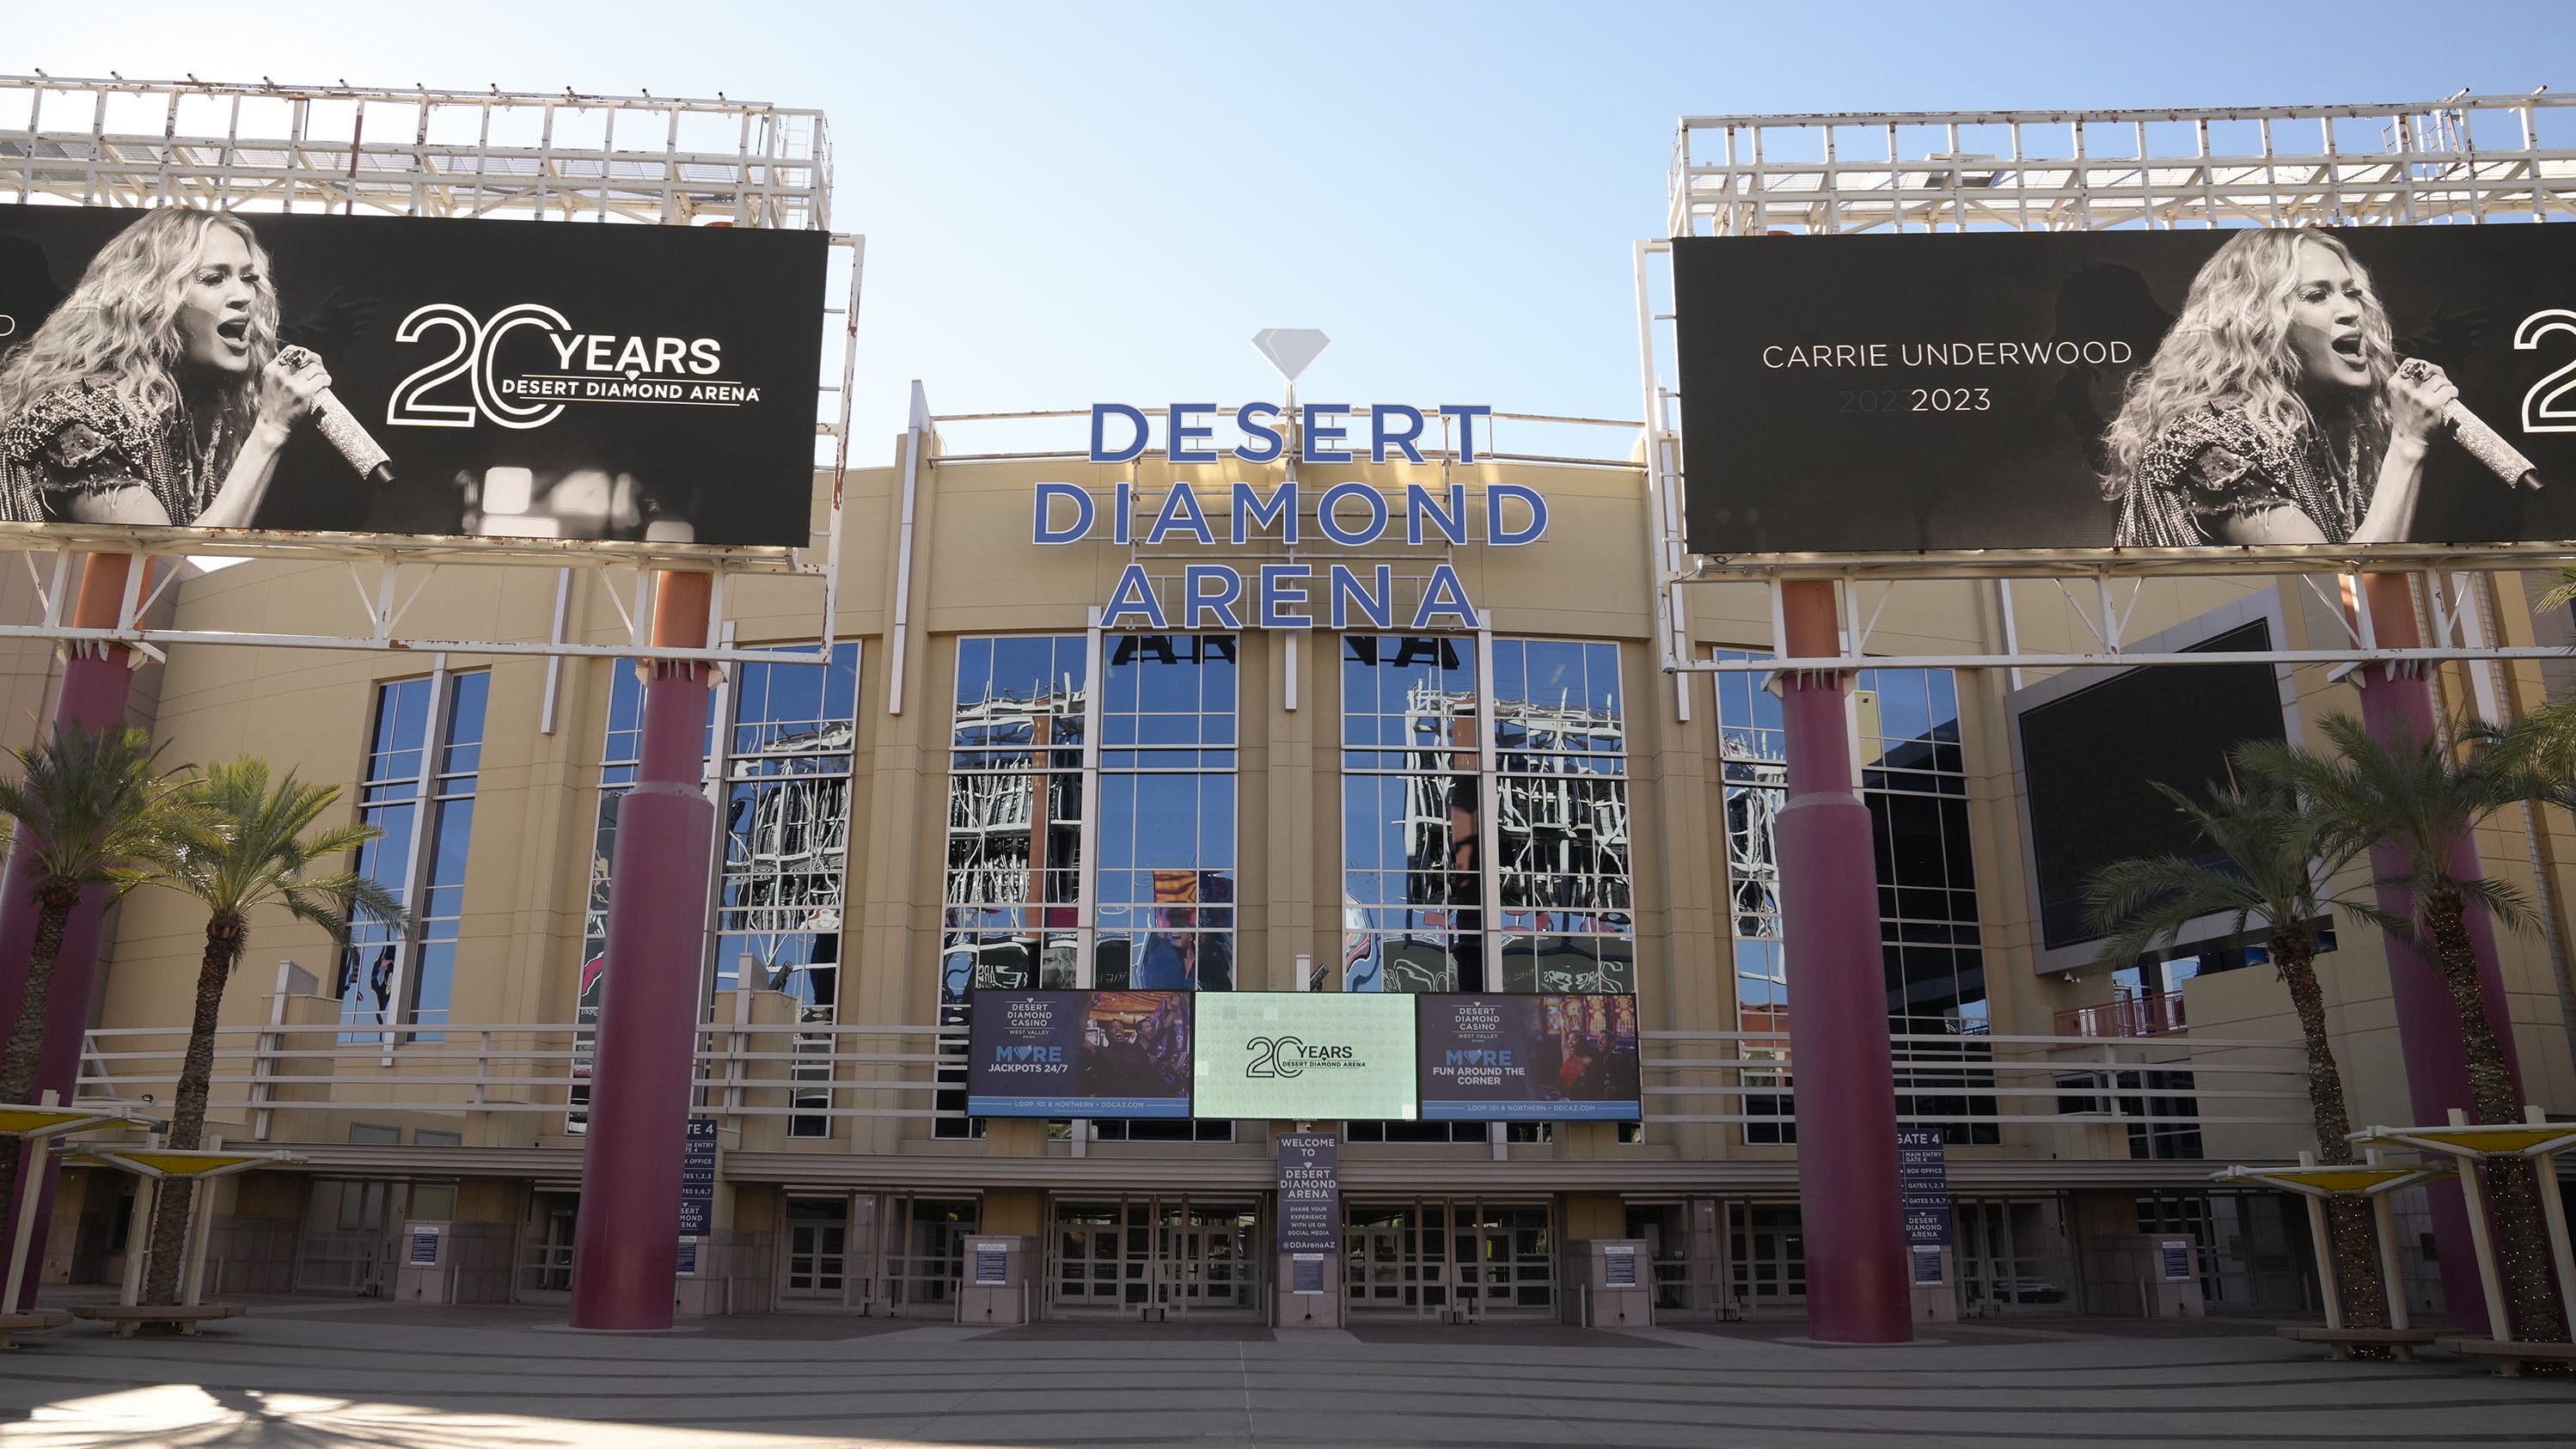 With Arizona Coyotes gone, $40M makeover of Glendale's Desert Diamond Arena starts soon. What's in store?